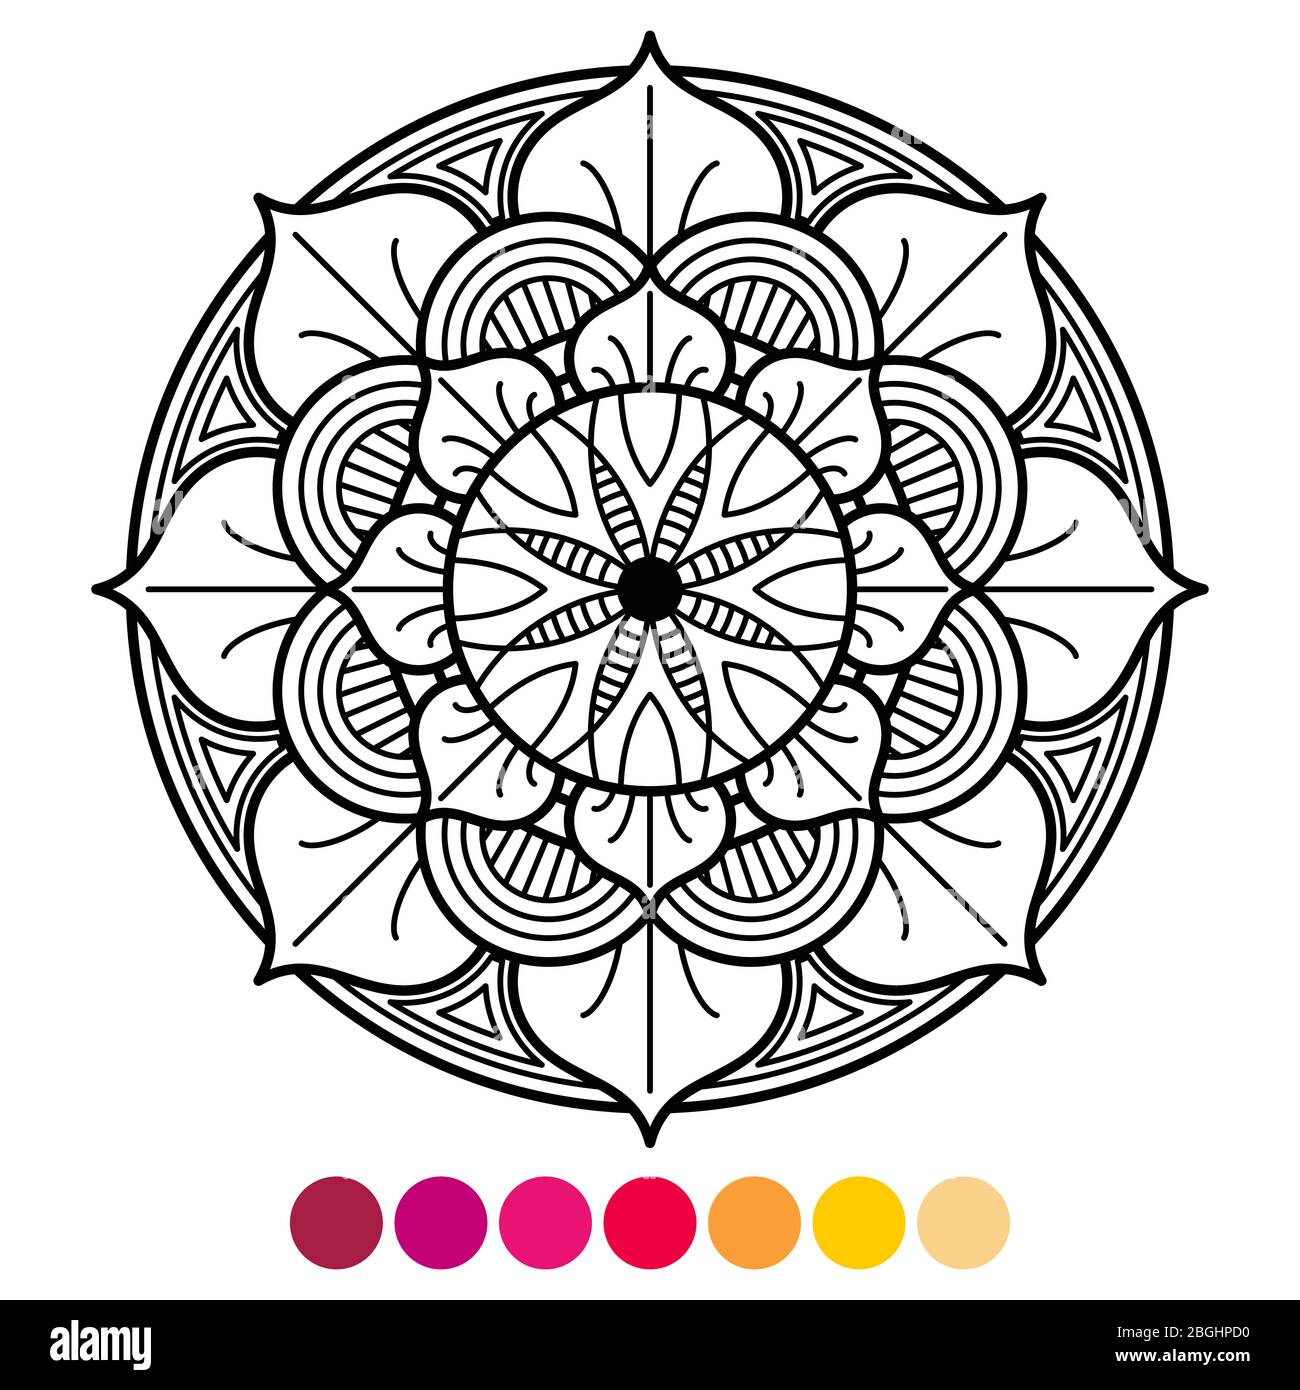 1+ Thousand Coloring Page Anti Stress Sample Royalty-Free Images, Stock  Photos & Pictures